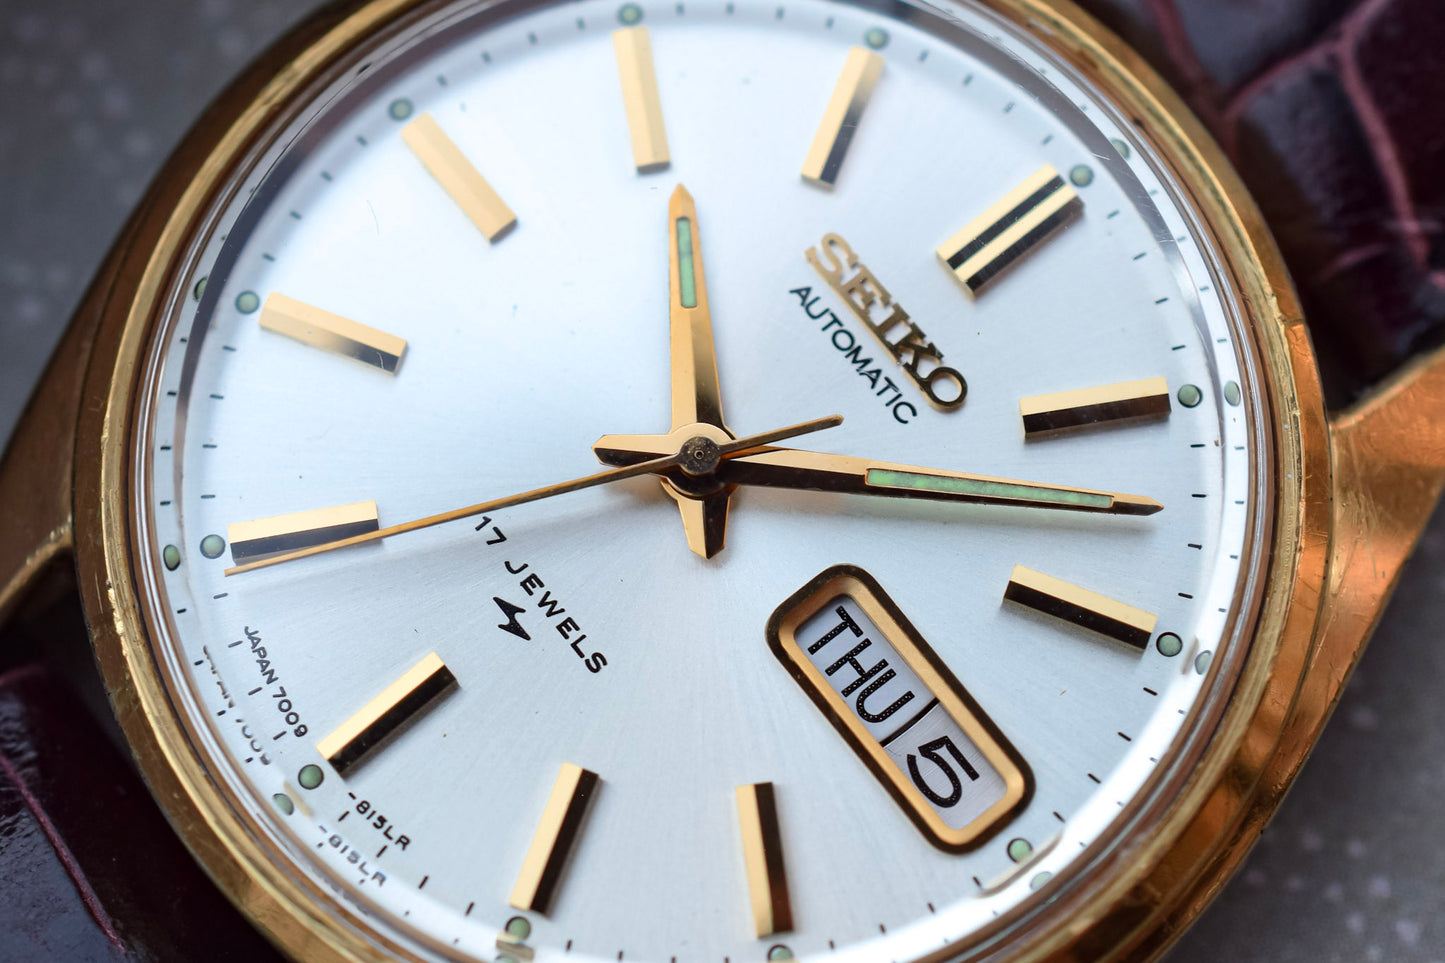 1978 Seiko Automatic Gold-Tone Day/Date Watch